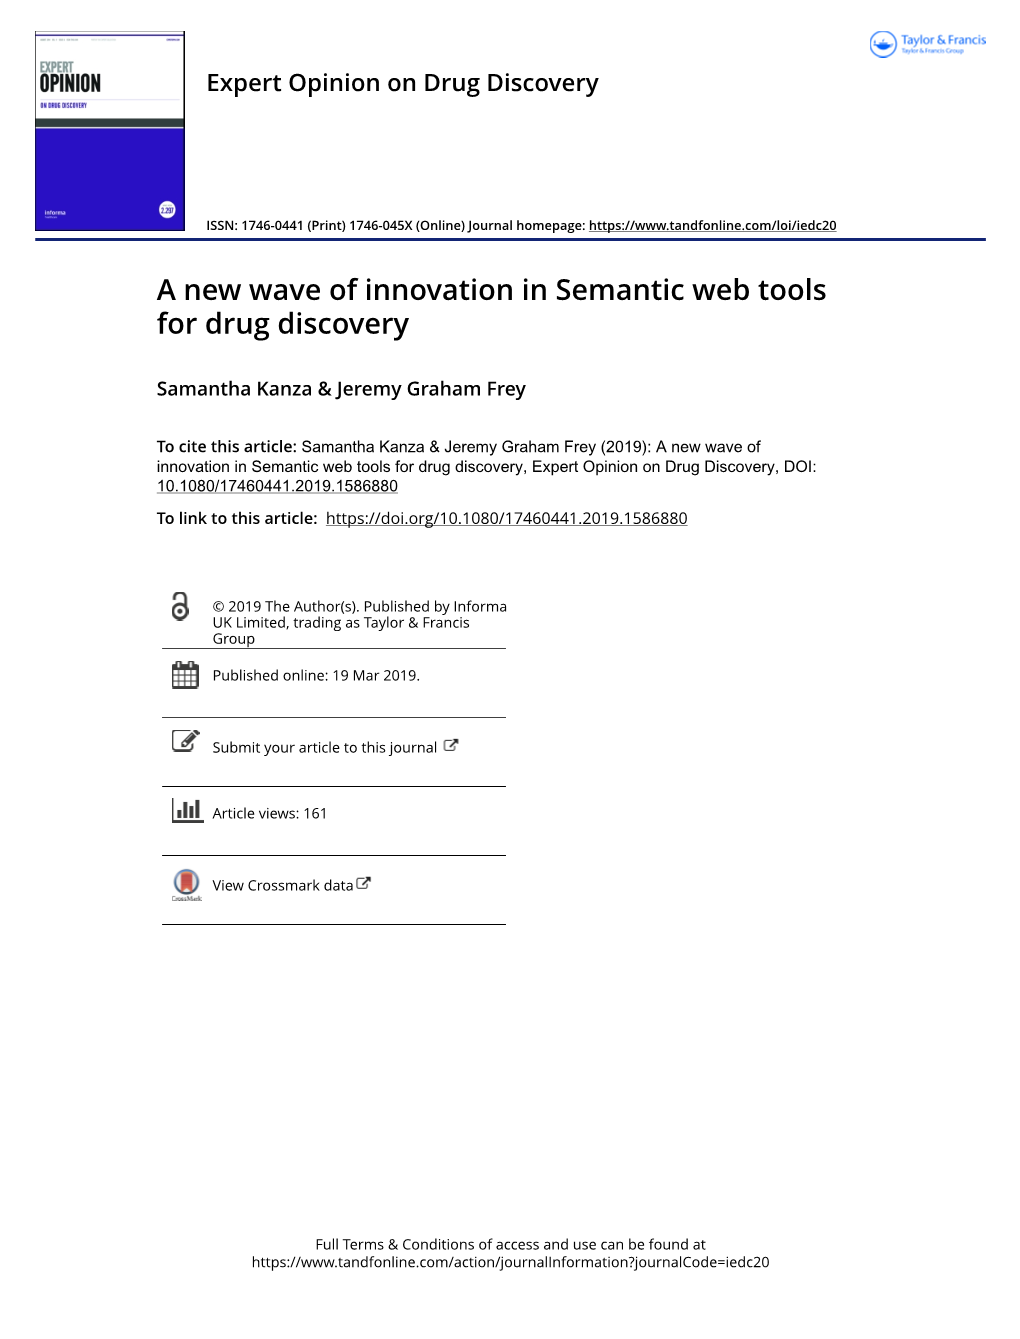 A New Wave of Innovation in Semantic Web Tools for Drug Discovery